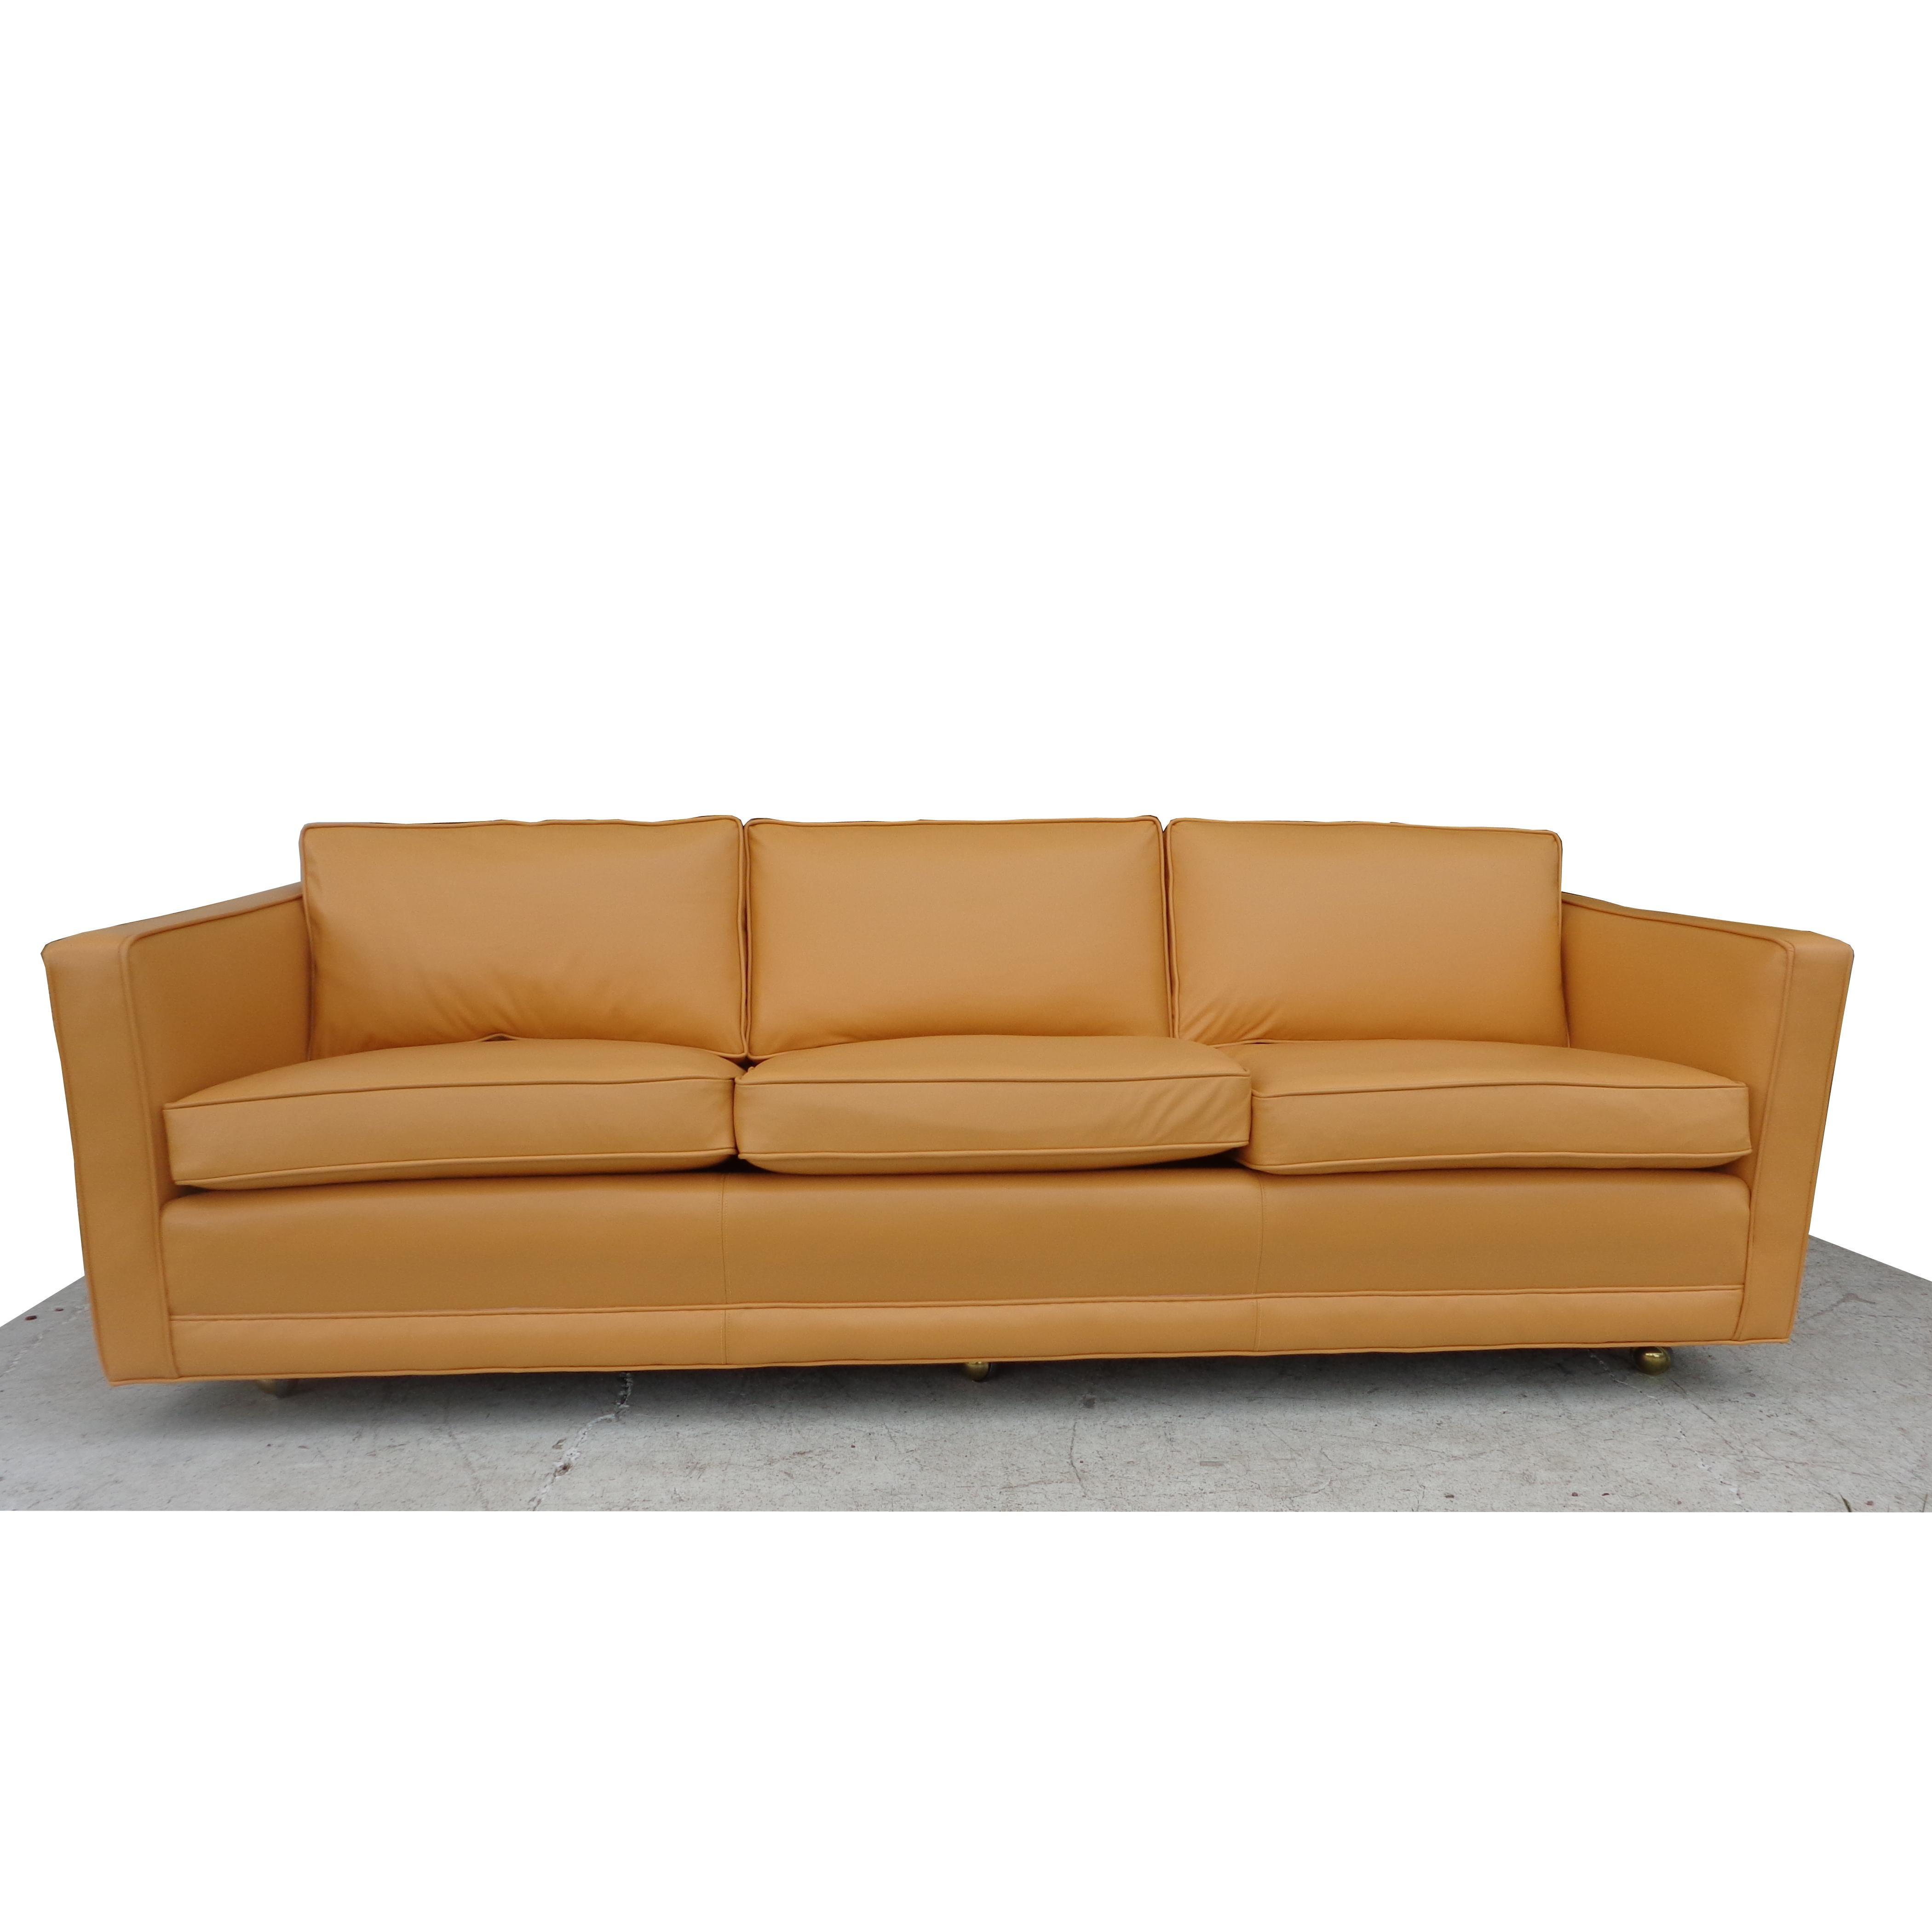 Dunbar Tuxedo Sofa Restored in Leather

Well made, low profile sofa from an established furniture maker in the Midwest. Recently restored in rich caramel leather. 
Crafted with lasagna support straps similar to construction in Dunbar furniture. 



